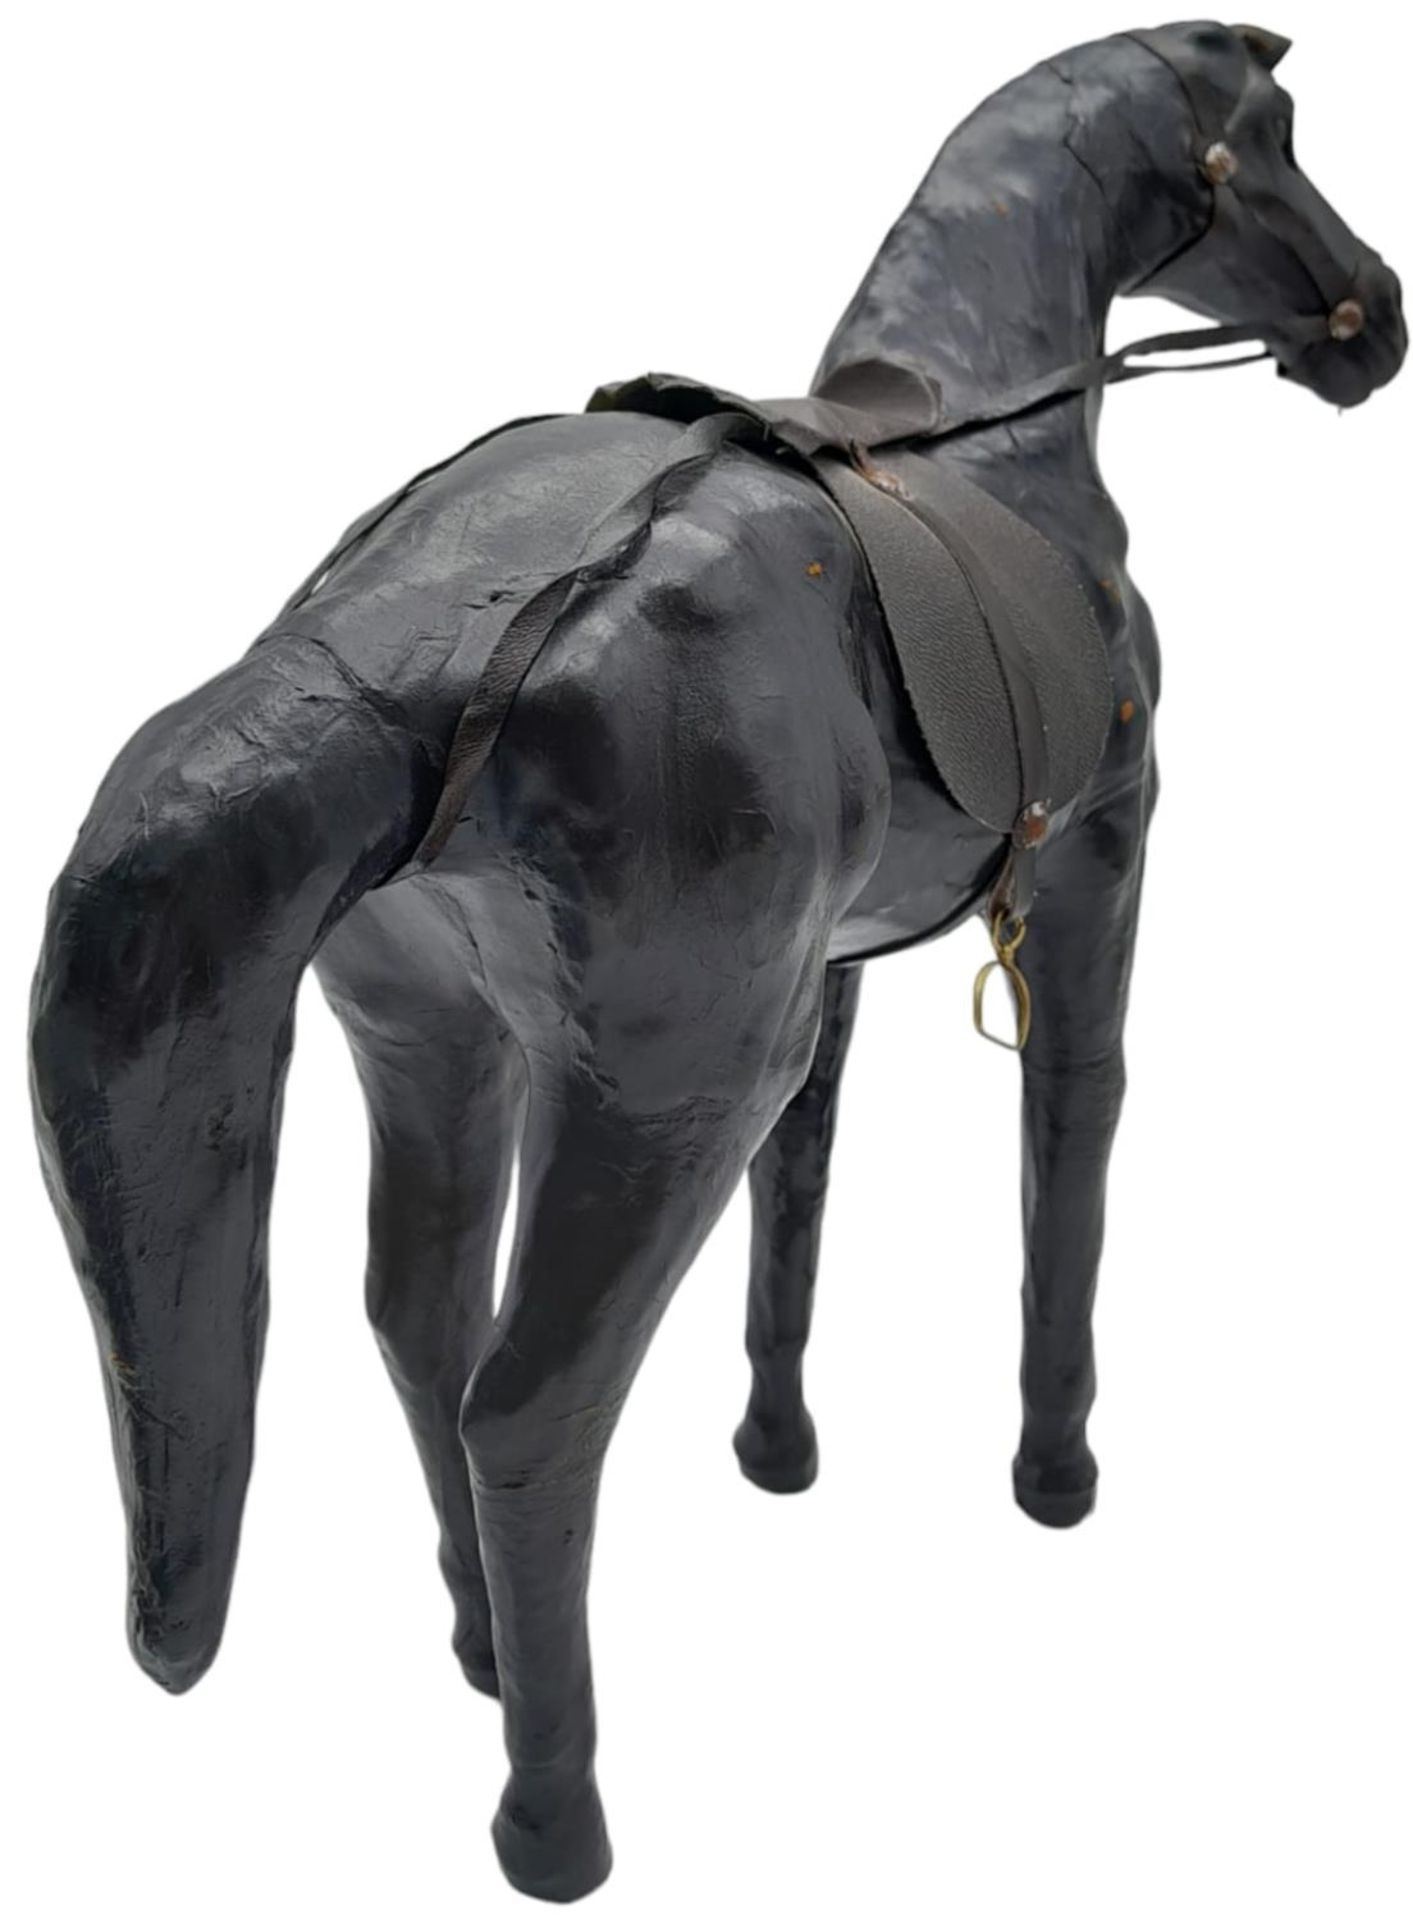 A Vintage Leather Liberty Style Leather Horse - Probably made by Liberty's in the 1960s. Amazing - Image 3 of 6